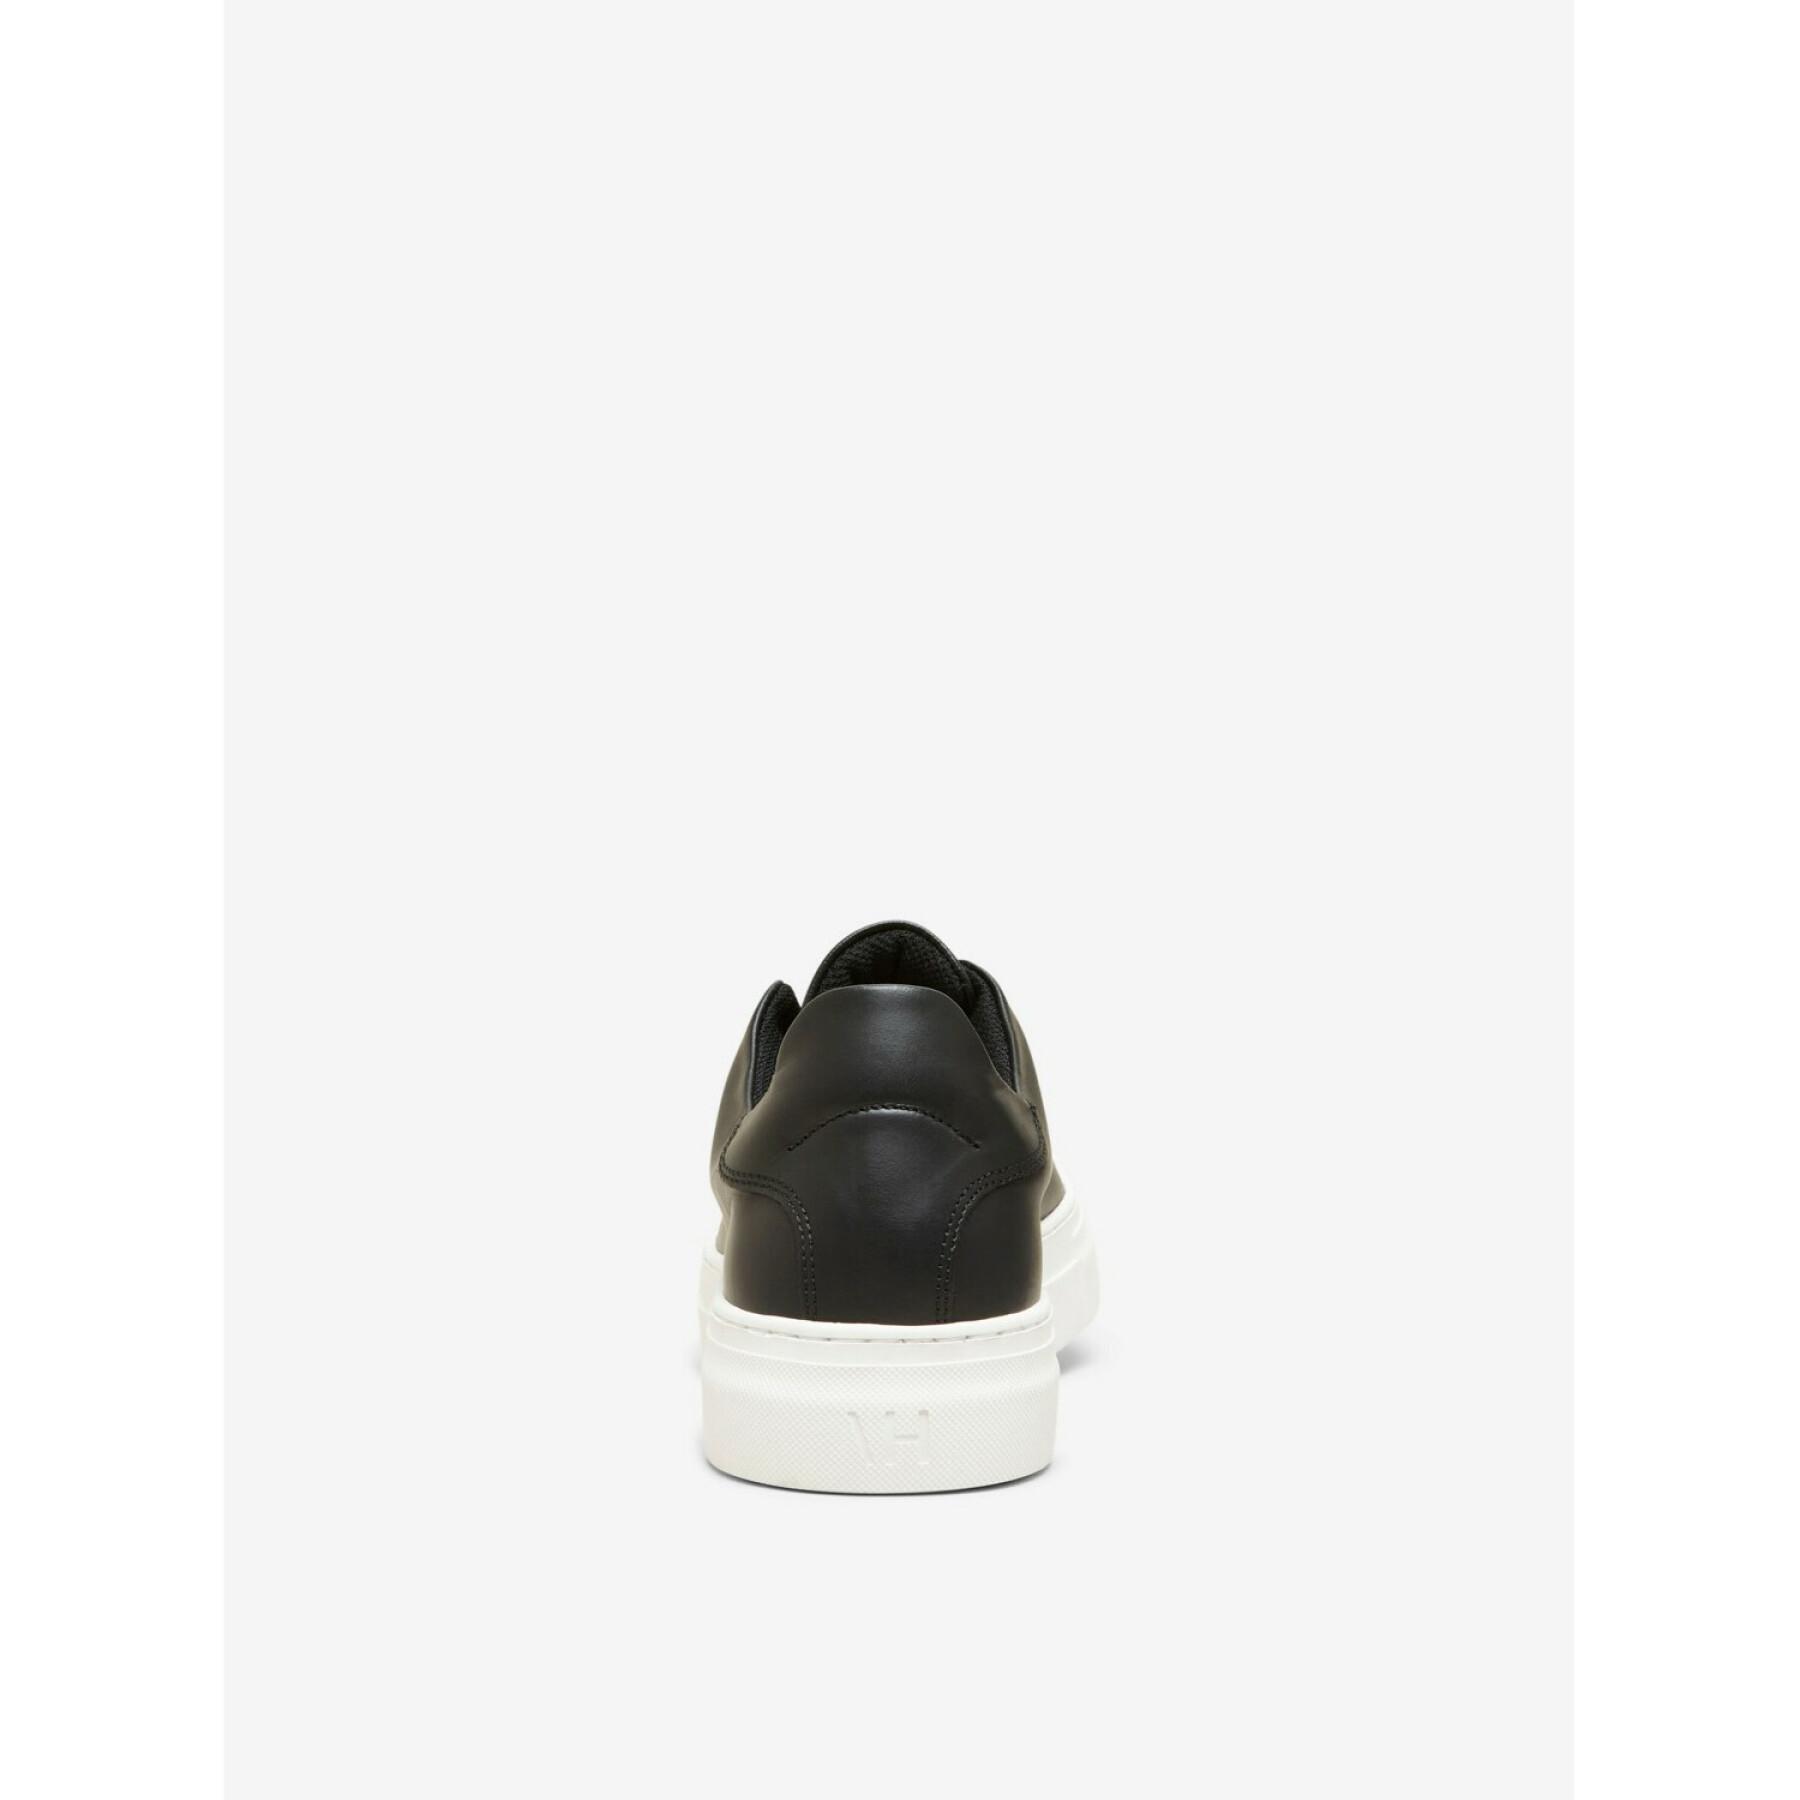 Chaussures Selected David chunky leather trainer